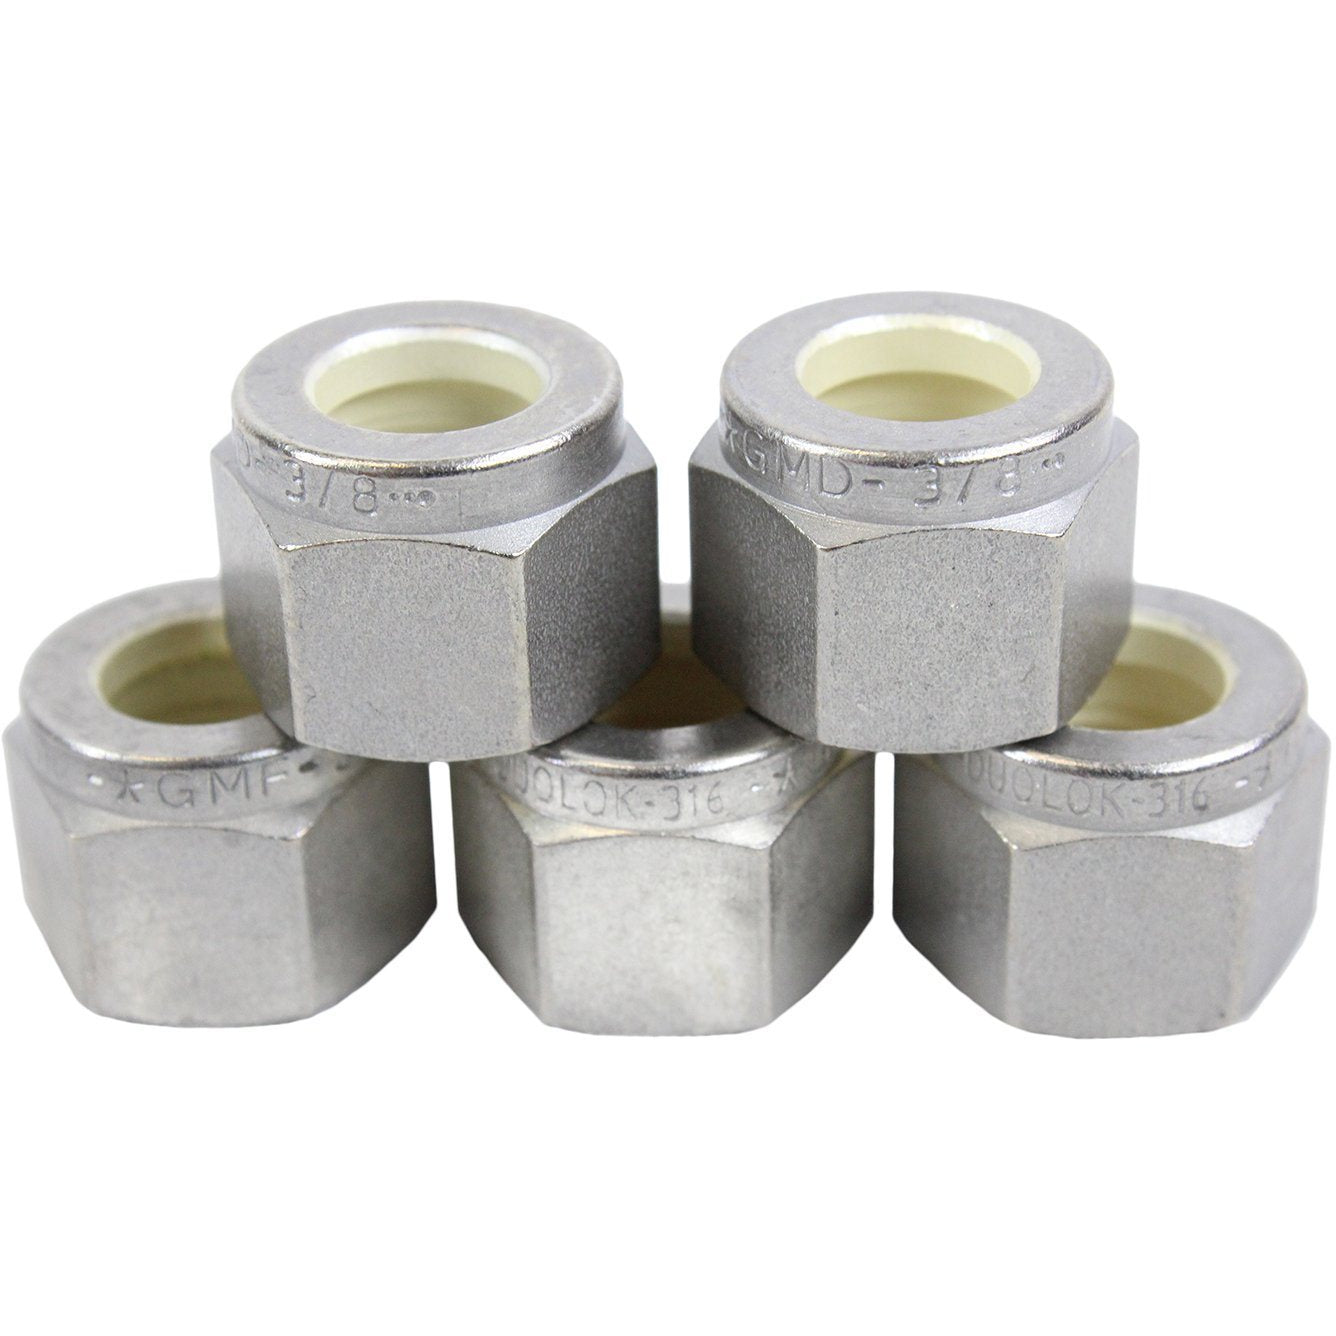 SSP Corporation, 5 Pack Tube Fitting Nuts